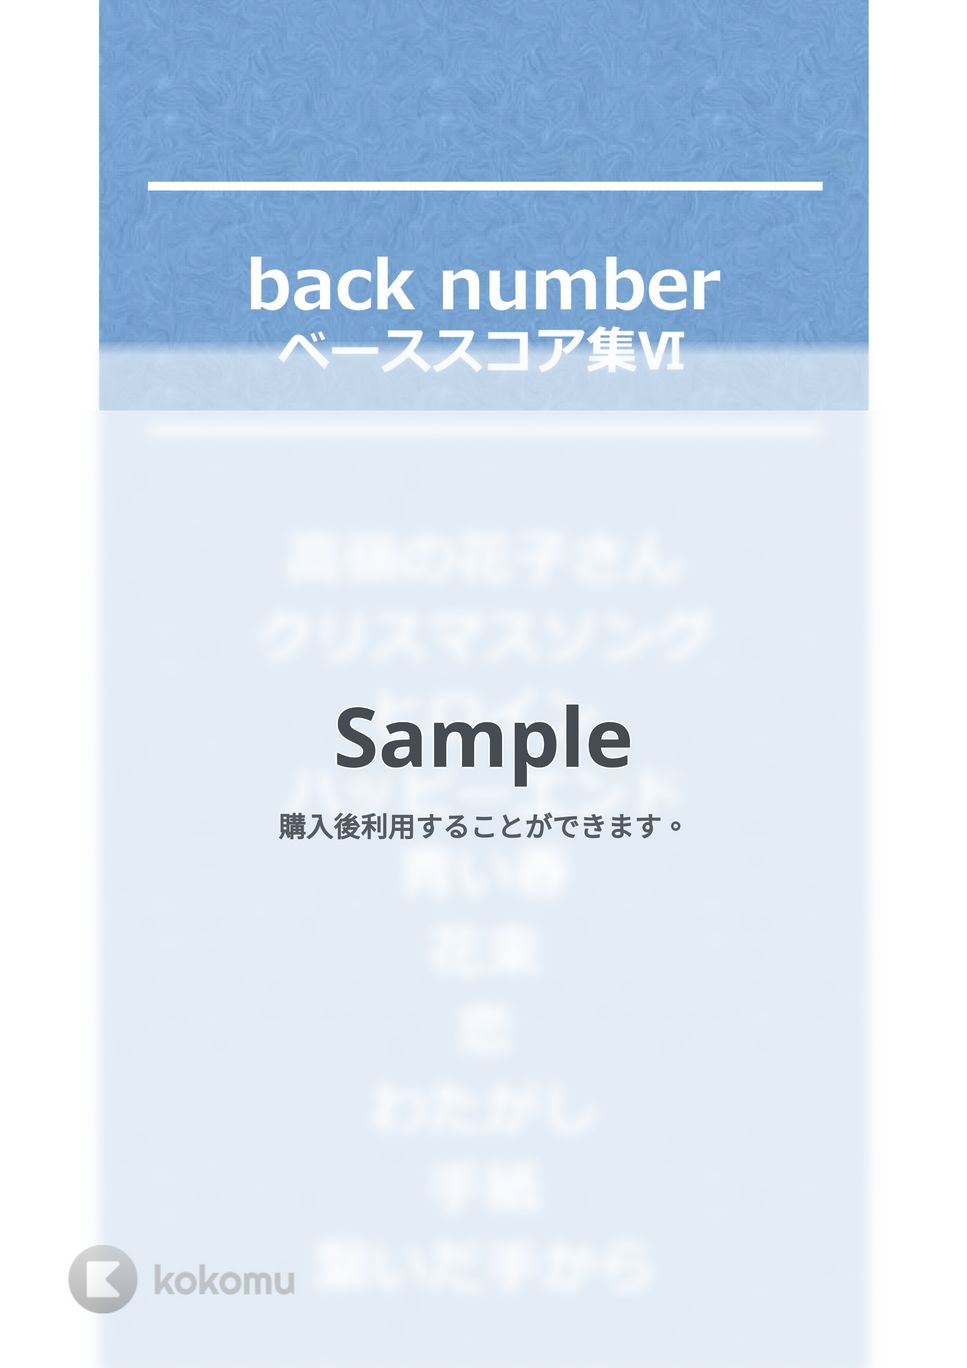 back number - back number ベースTAB譜面 10曲セット集Ⅱ by たぶべー